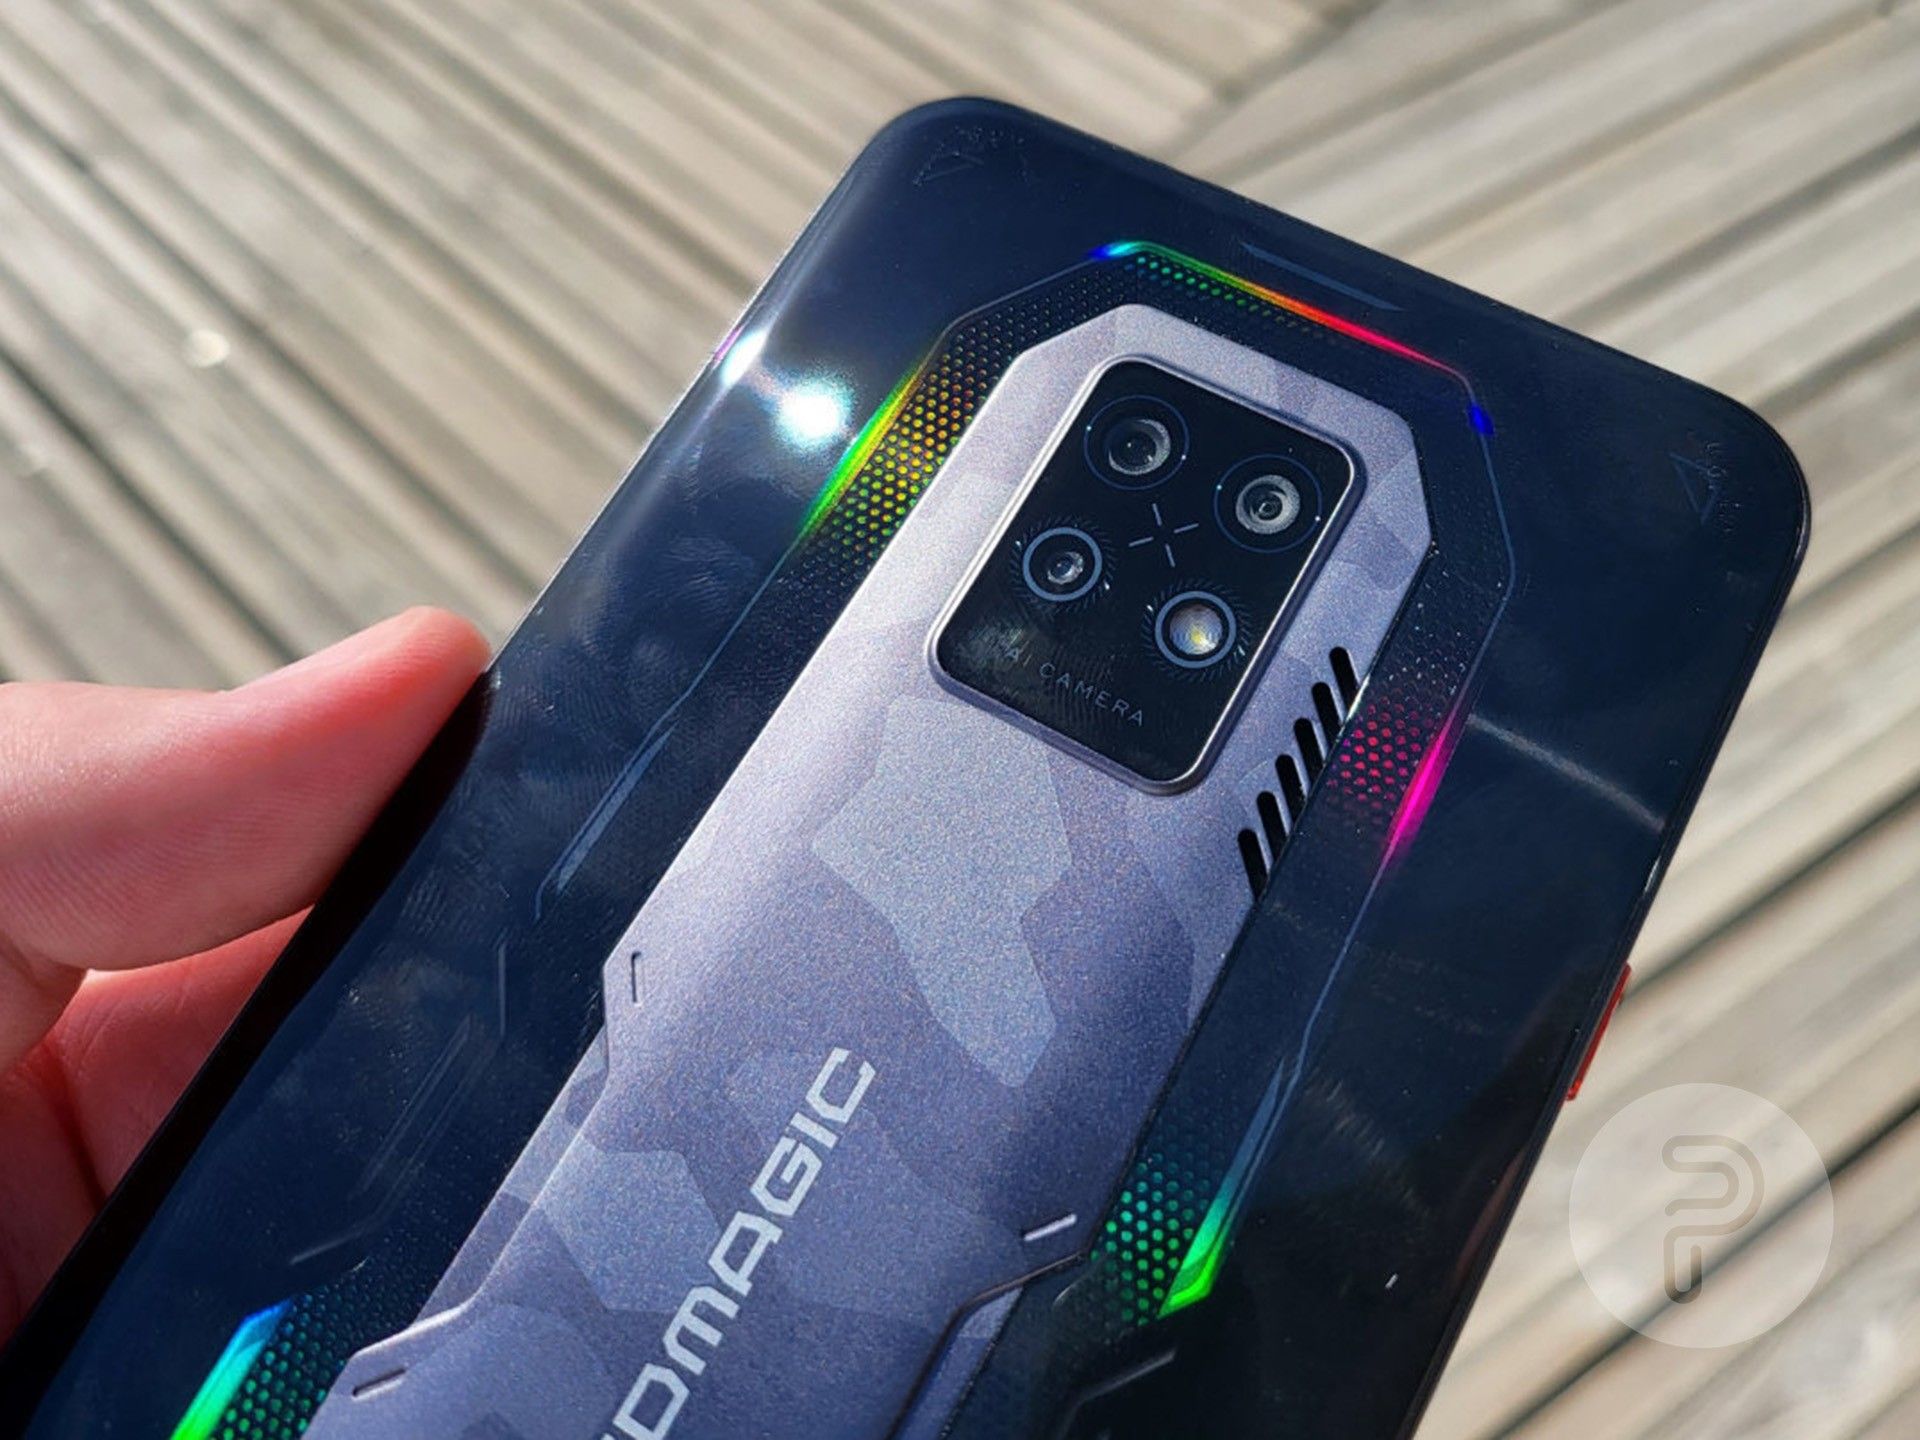 RedMagic 9 Pro gaming phone announced with attention-grabbing design